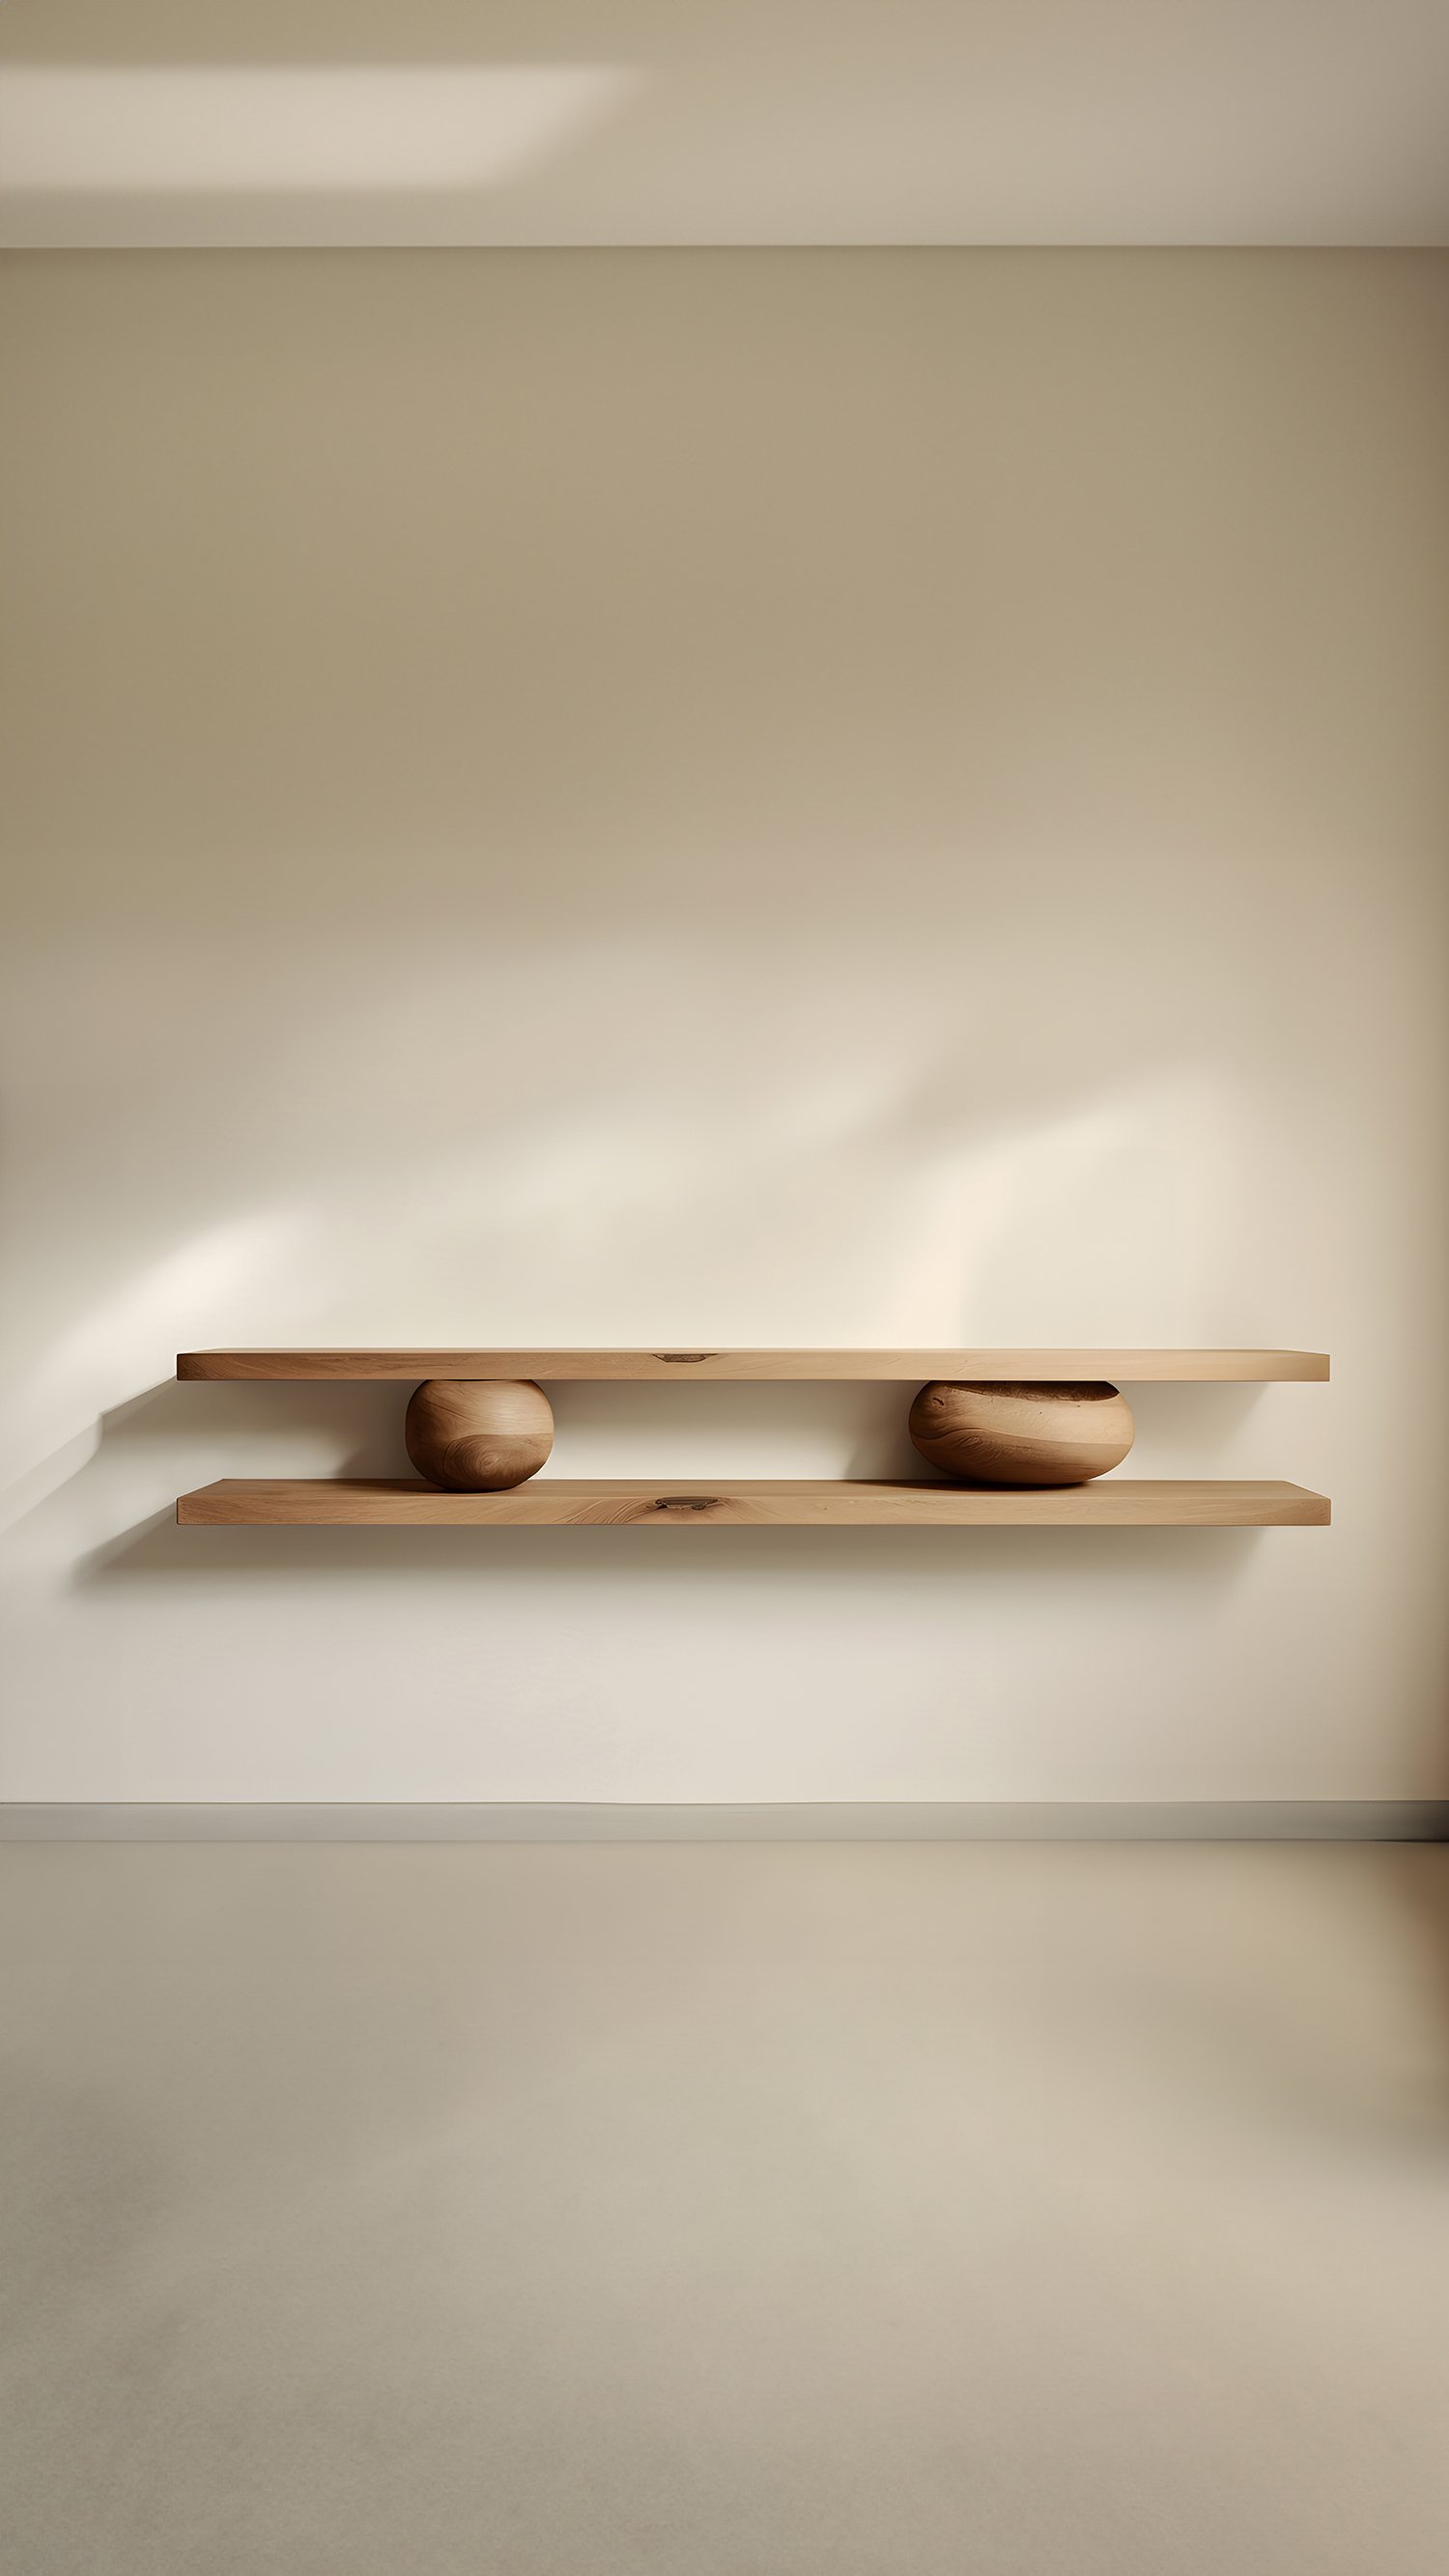 Set of Two Large Floating Shelves with Two Sculptural Wooden Pebble Accents in the Middle, Sereno by Joel Escalona — 3.jpg